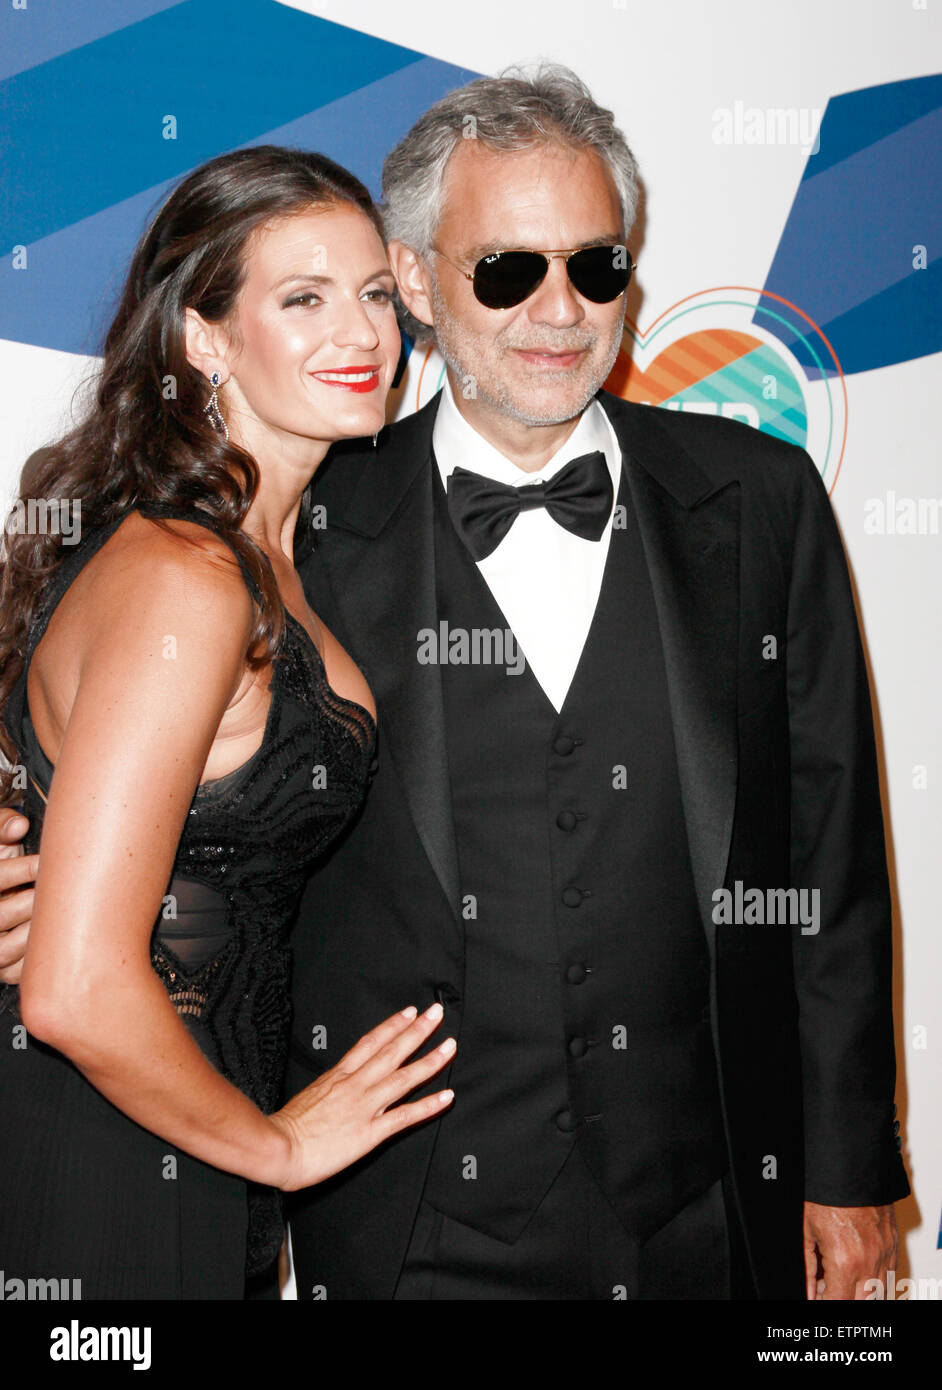 Las Vegas, Nevada, USA. 13th June, 2015. Singer Andrea Bocelli and wife Veronica Bocelli attend the Keep Memory Alive's 19th Annual ''Power of Love'' gala on June 13, 2015 at the MGM Grand Arena in Las Vegas, Nevada © Marcel Thomas/ZUMA Wire/Alamy Live News Stock Photo